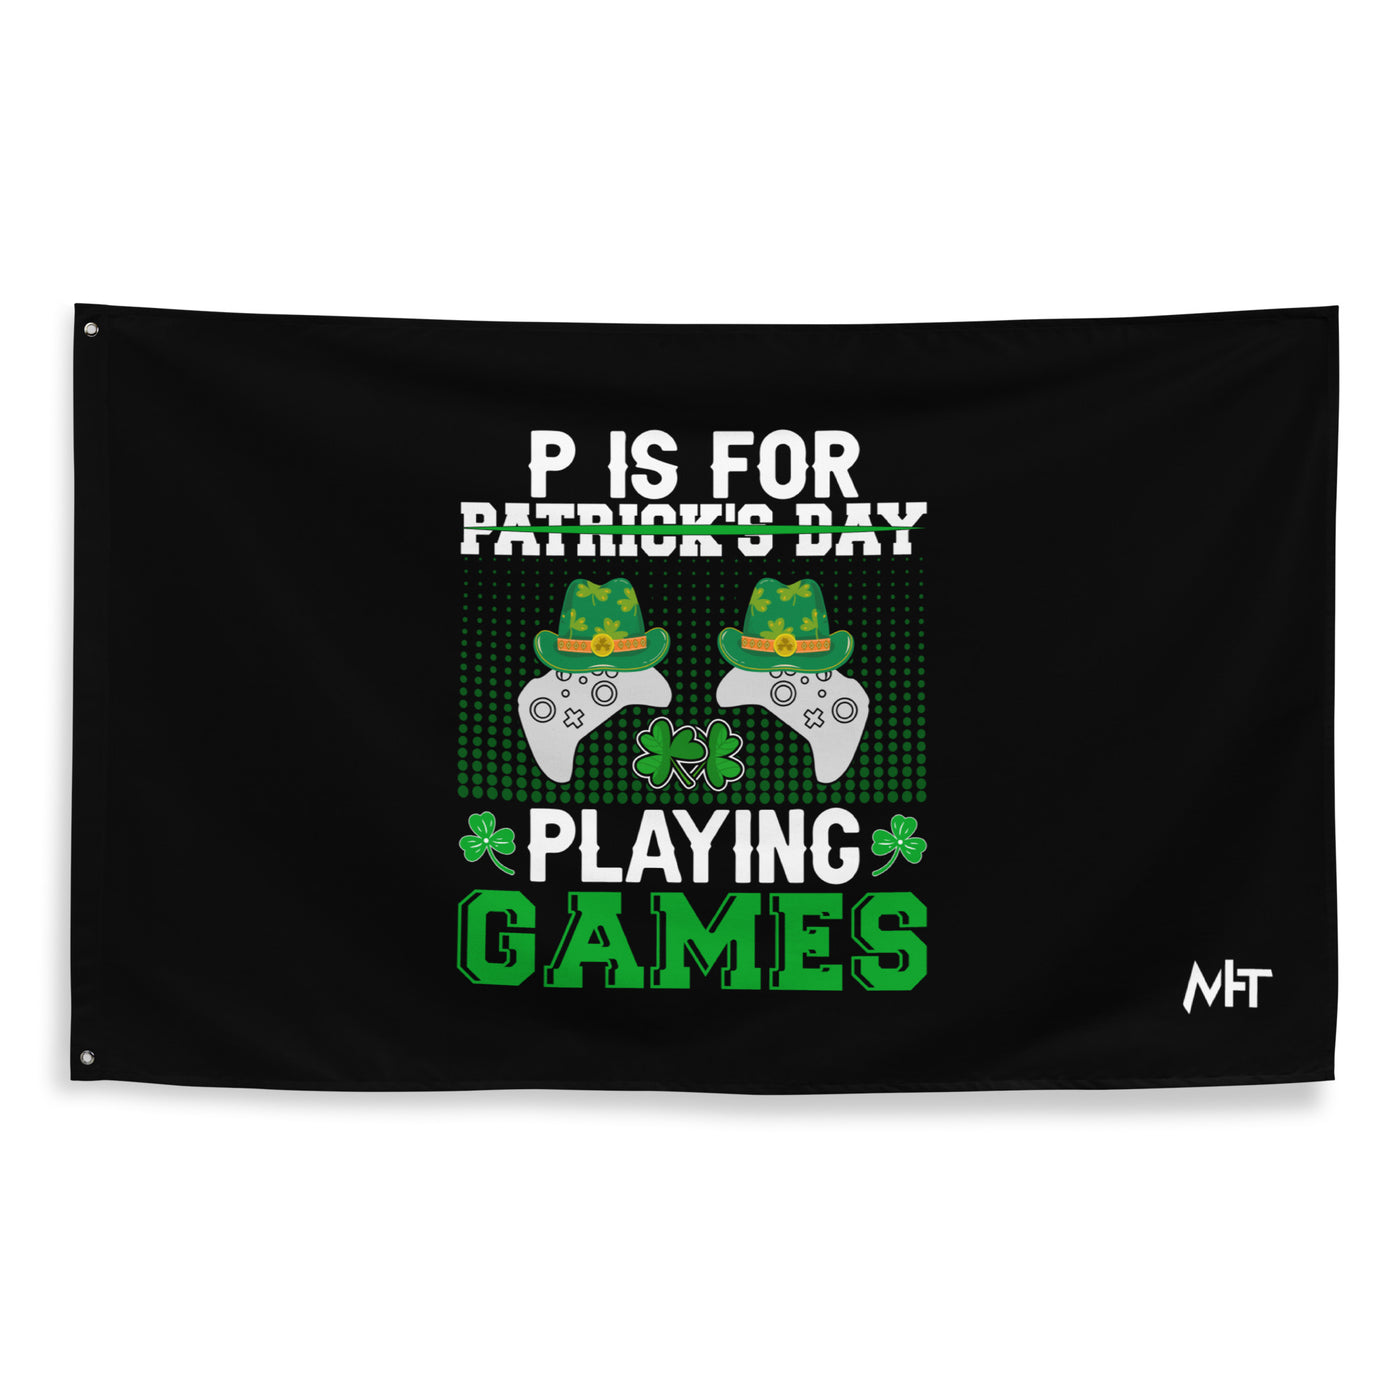 P is for "Playing Games" - Flag